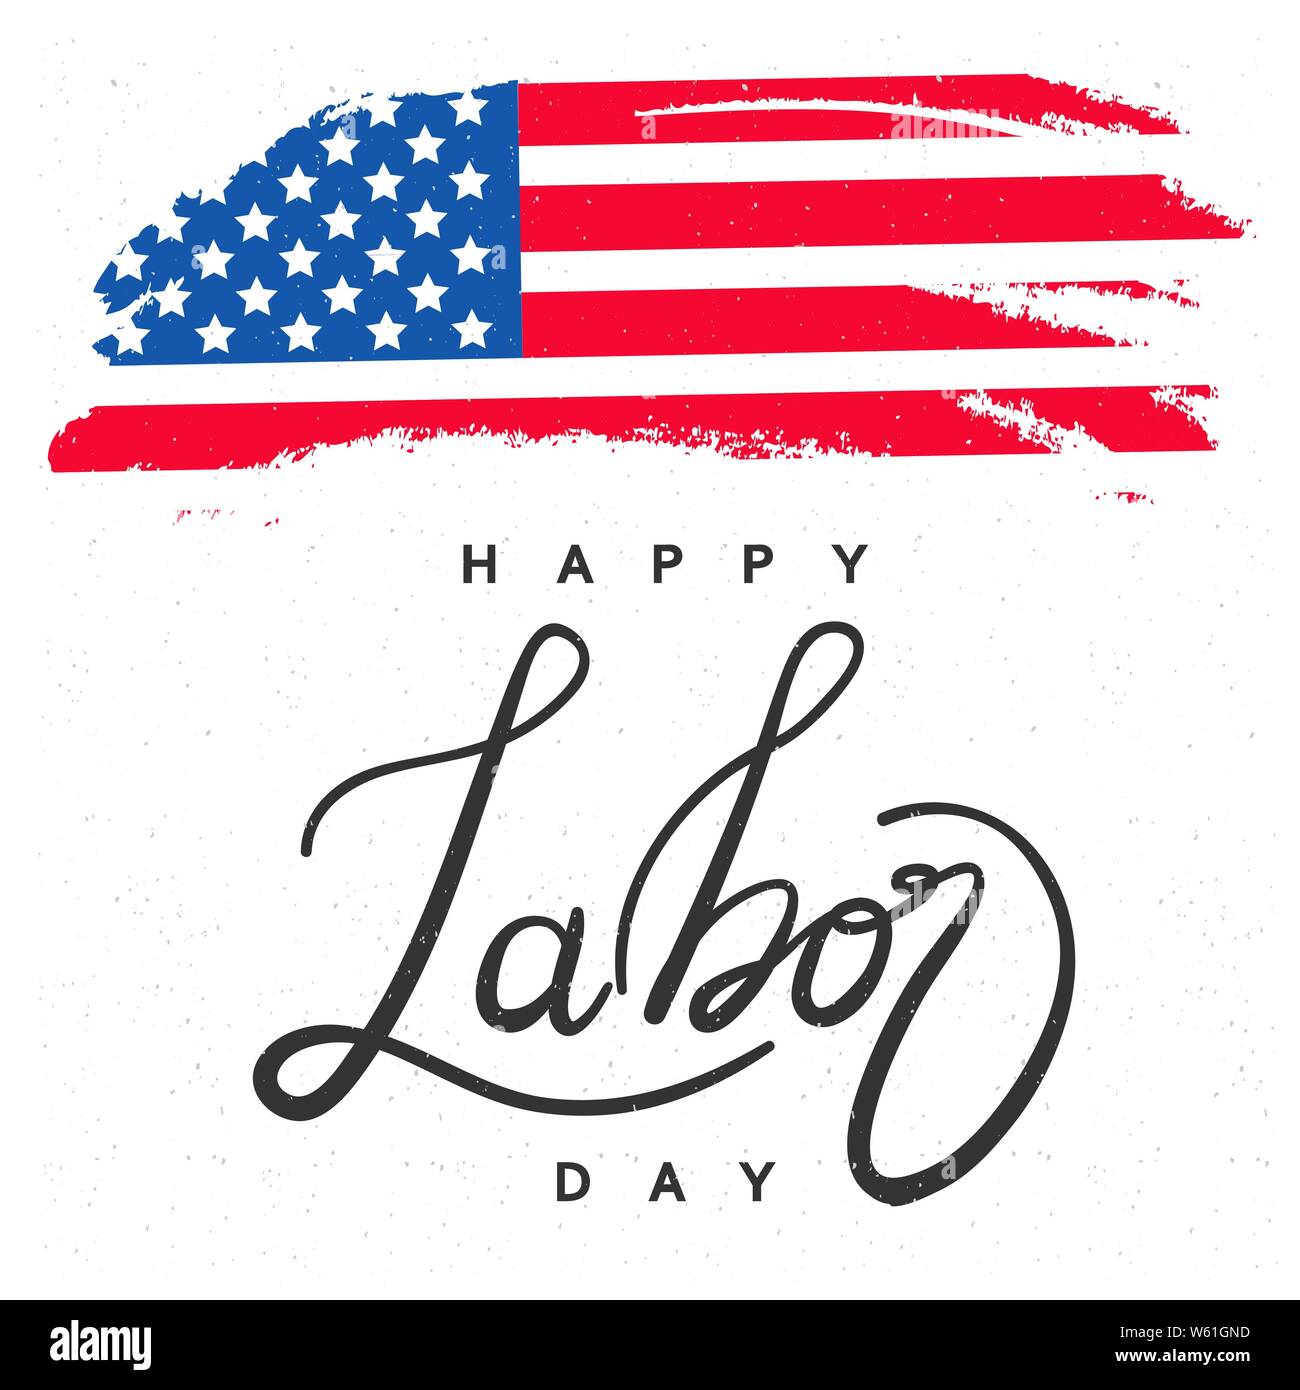 Labor day background design vector template graphic or banners  illustrations Stock Vector